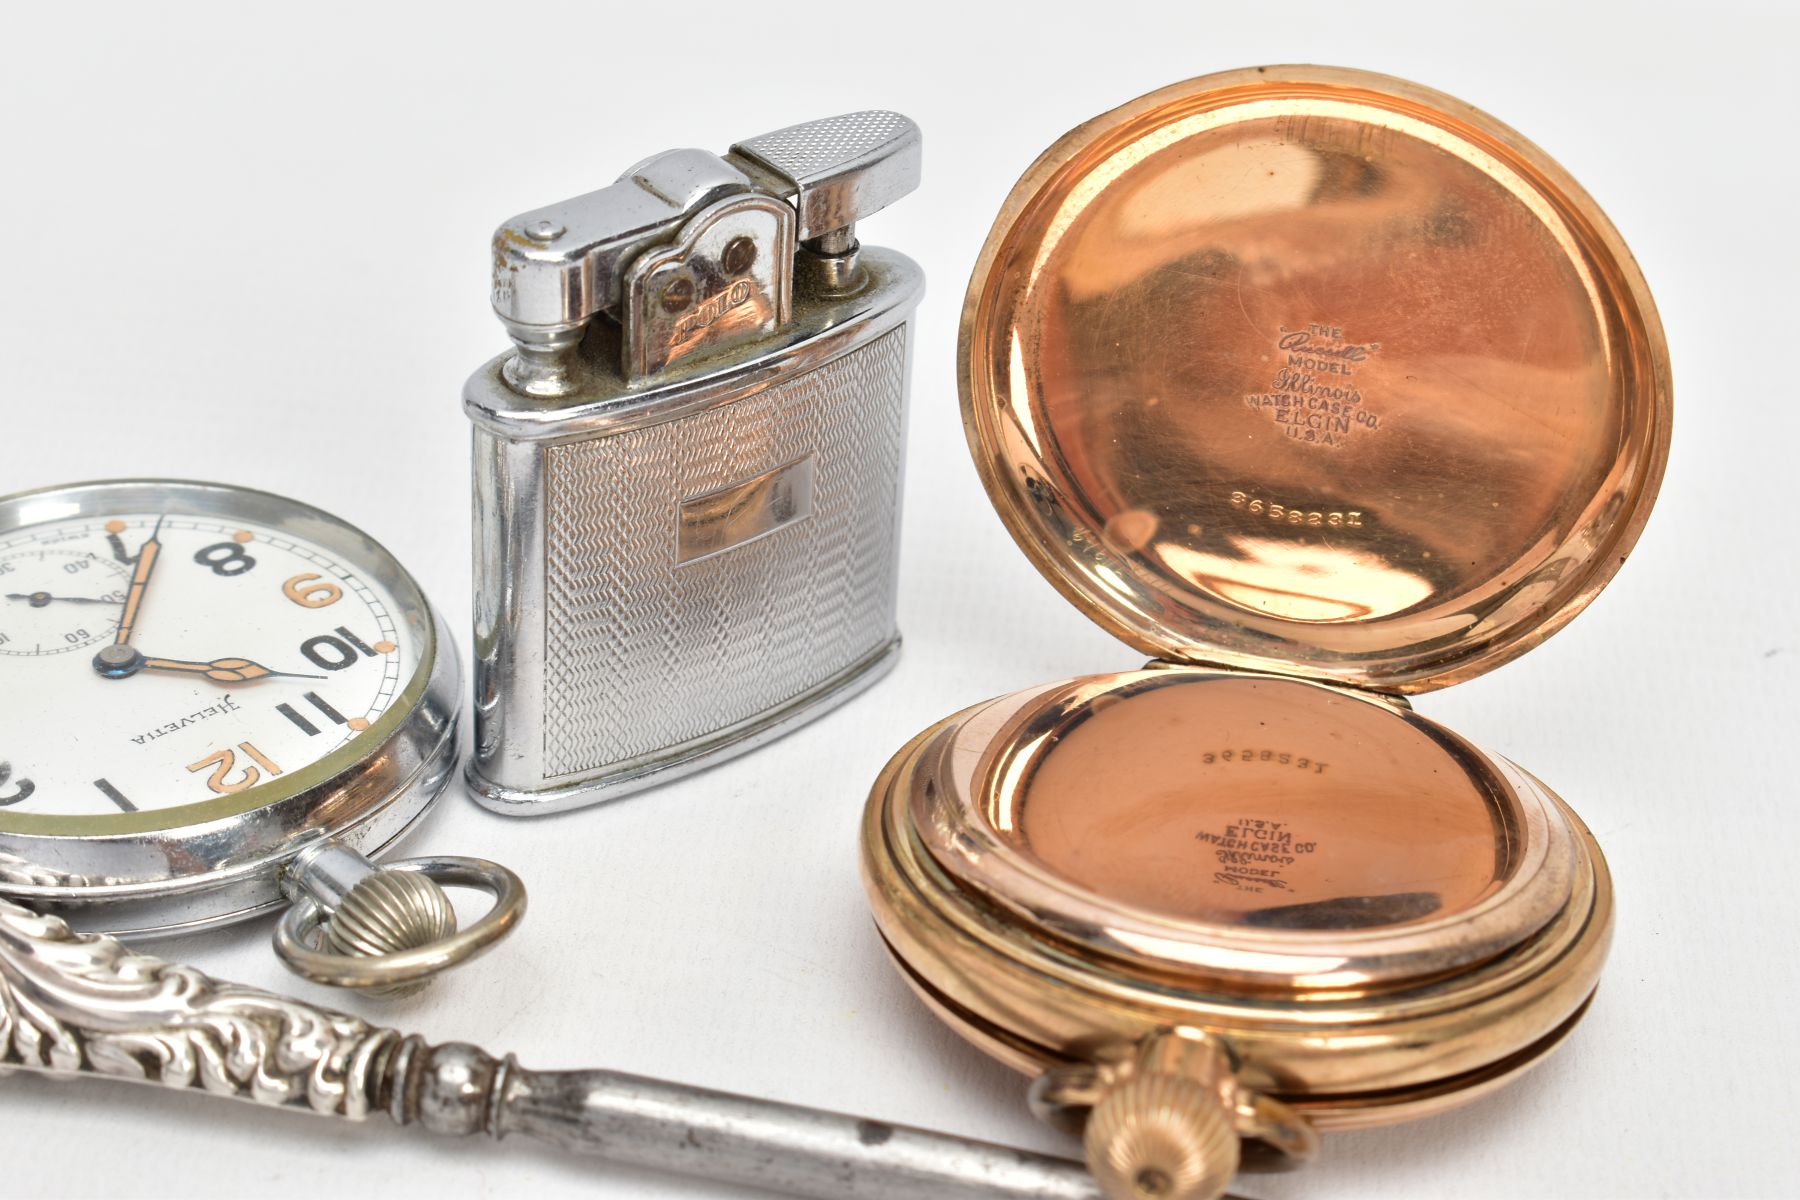 A GOLD-PLATED FULL HUNTER POCKET WATCH, A WHITE METAL OPEN FACE POCKET WATCH, LIGTHER AND A BUTTON - Image 3 of 5